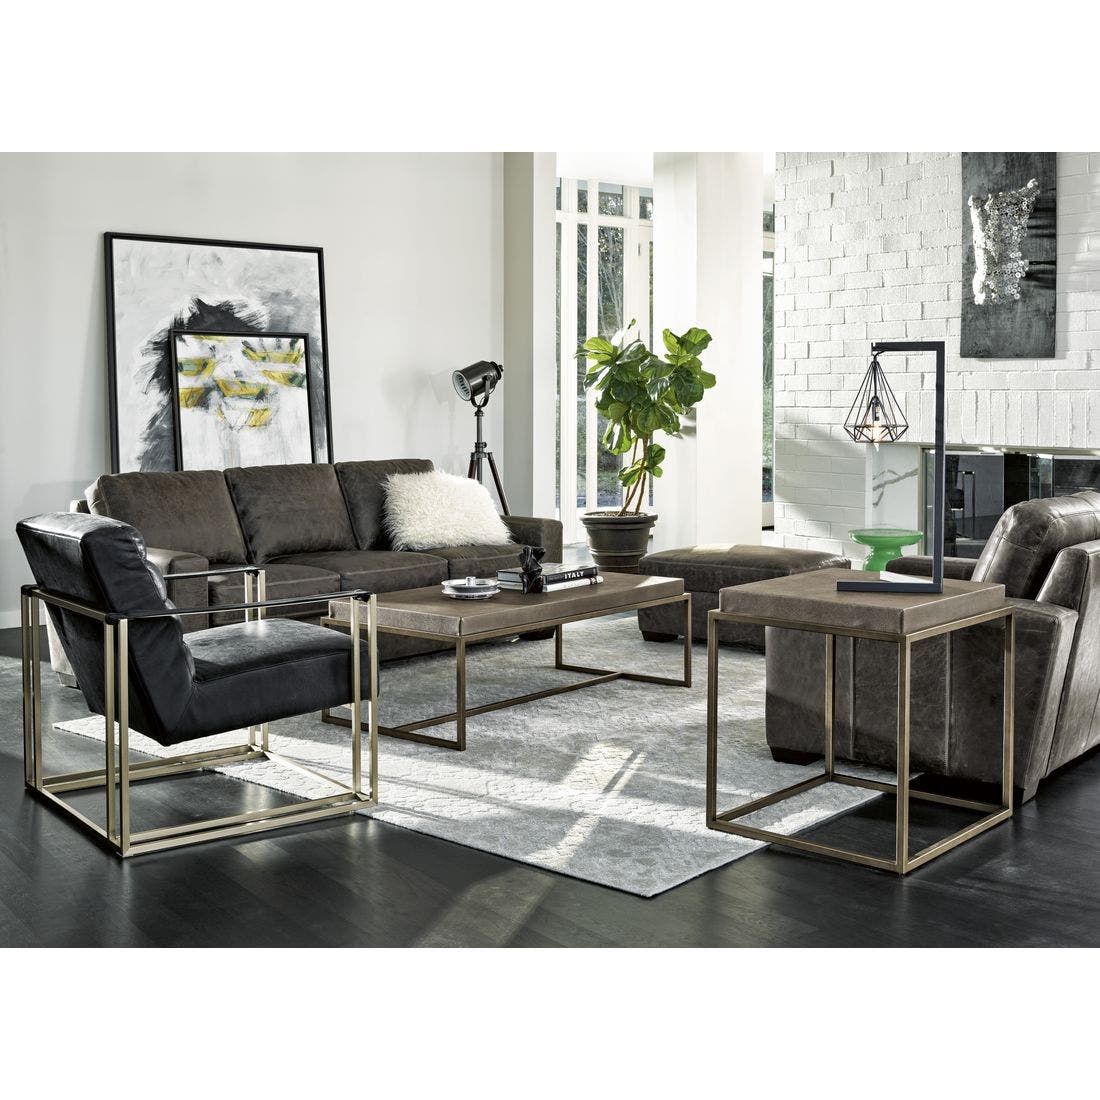 19134653-647801-furniture-living-room-coffee-table-31